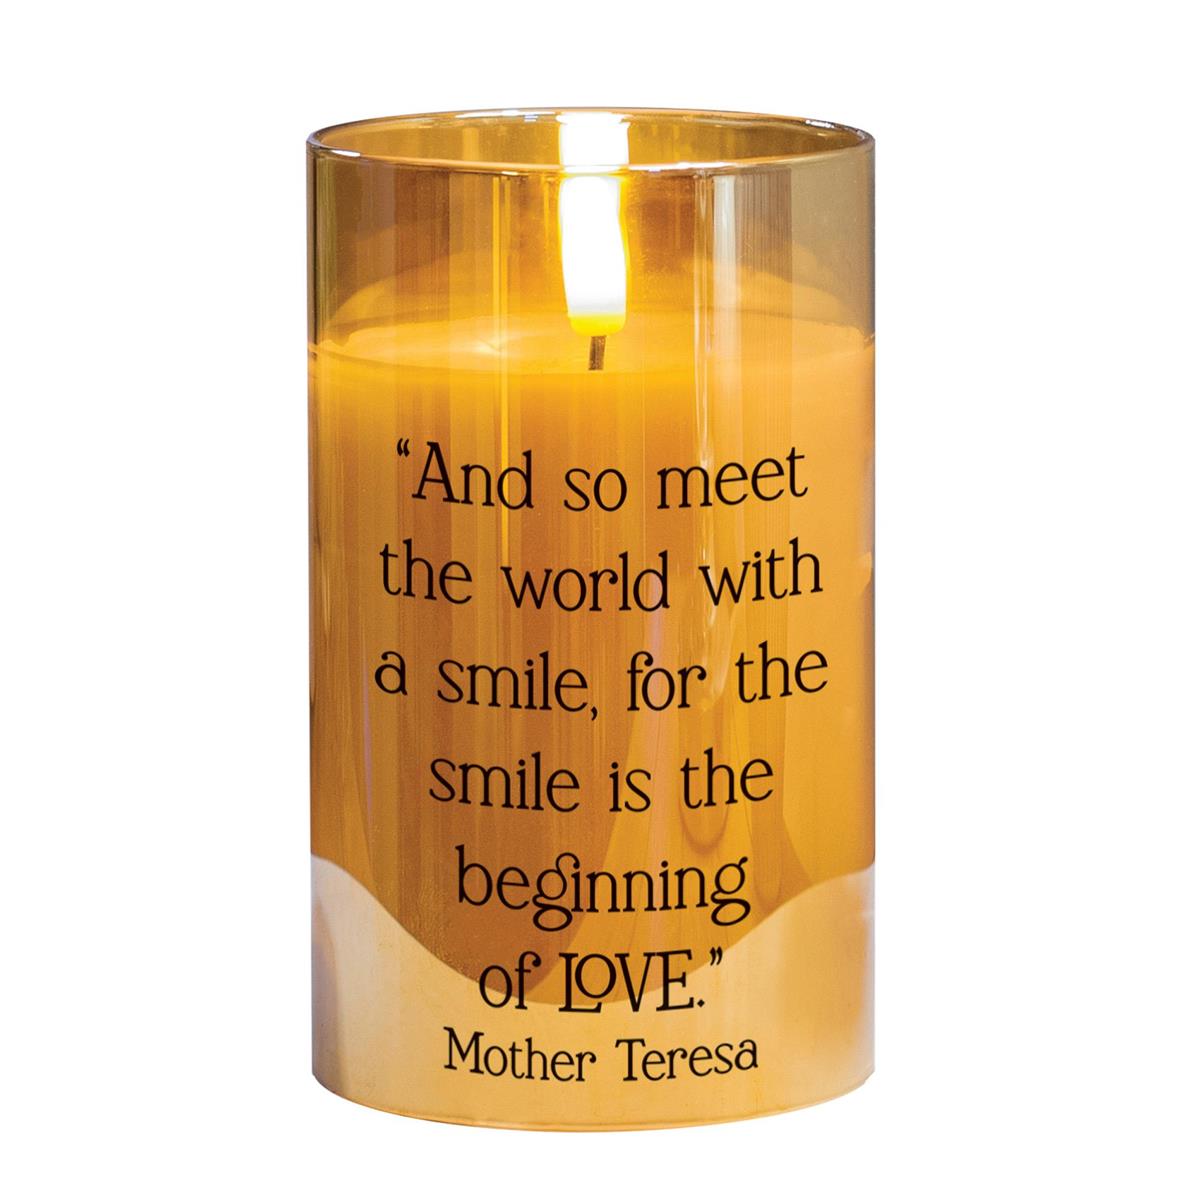 Therese of Lisieux Mother's Candle